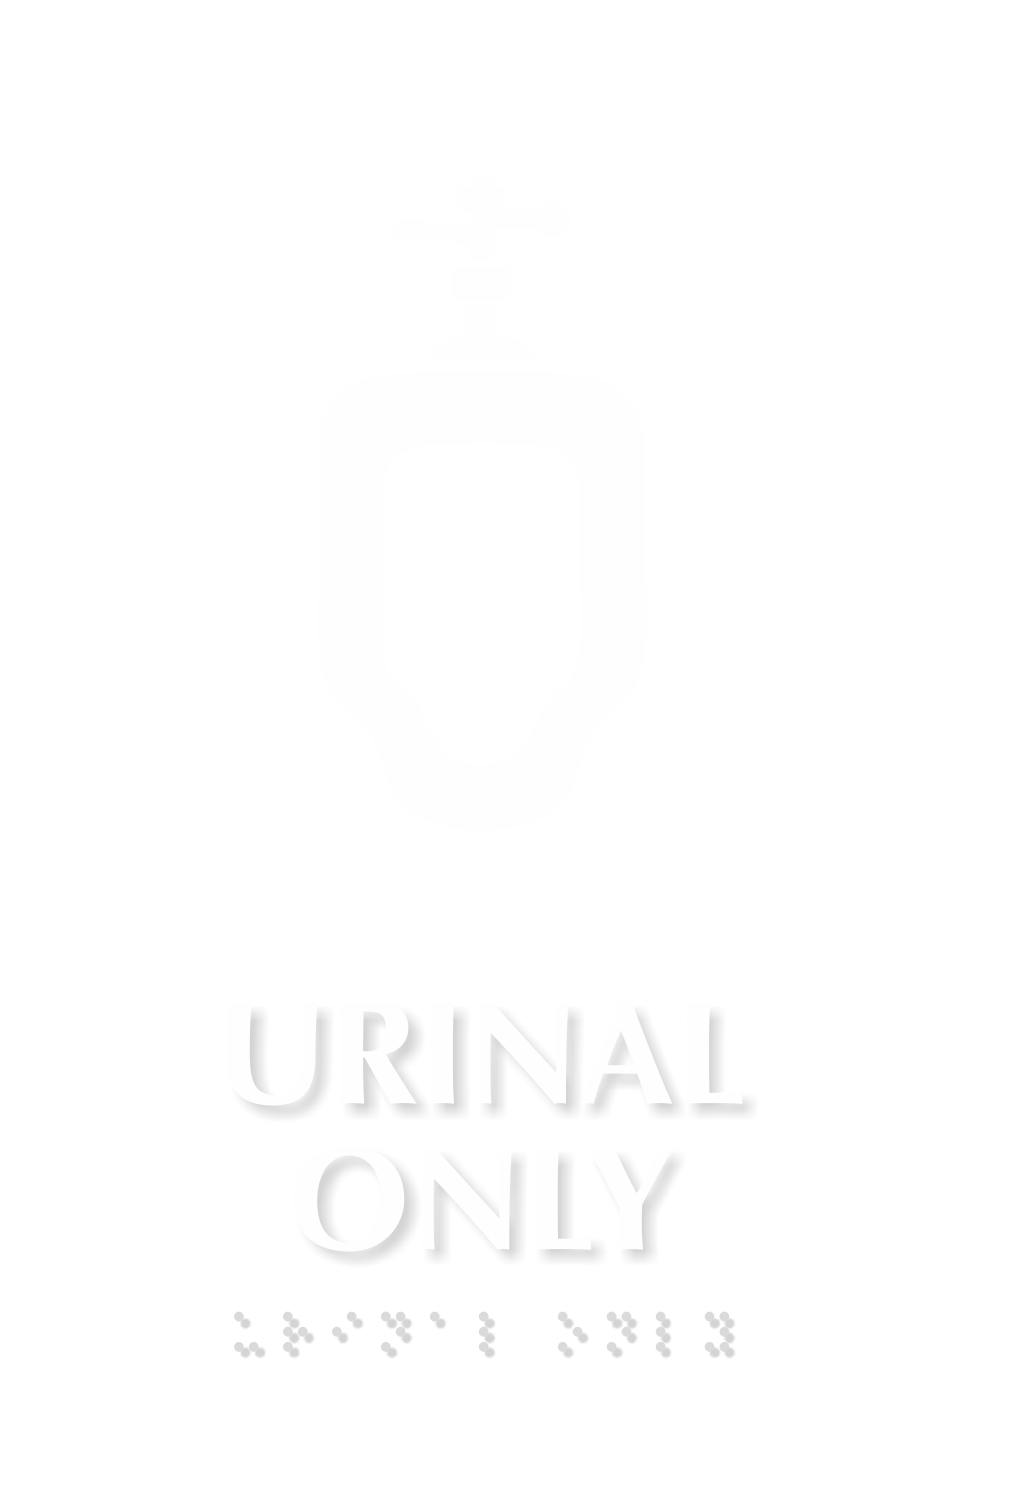 Urinal Only TactileTouch Braille Sign